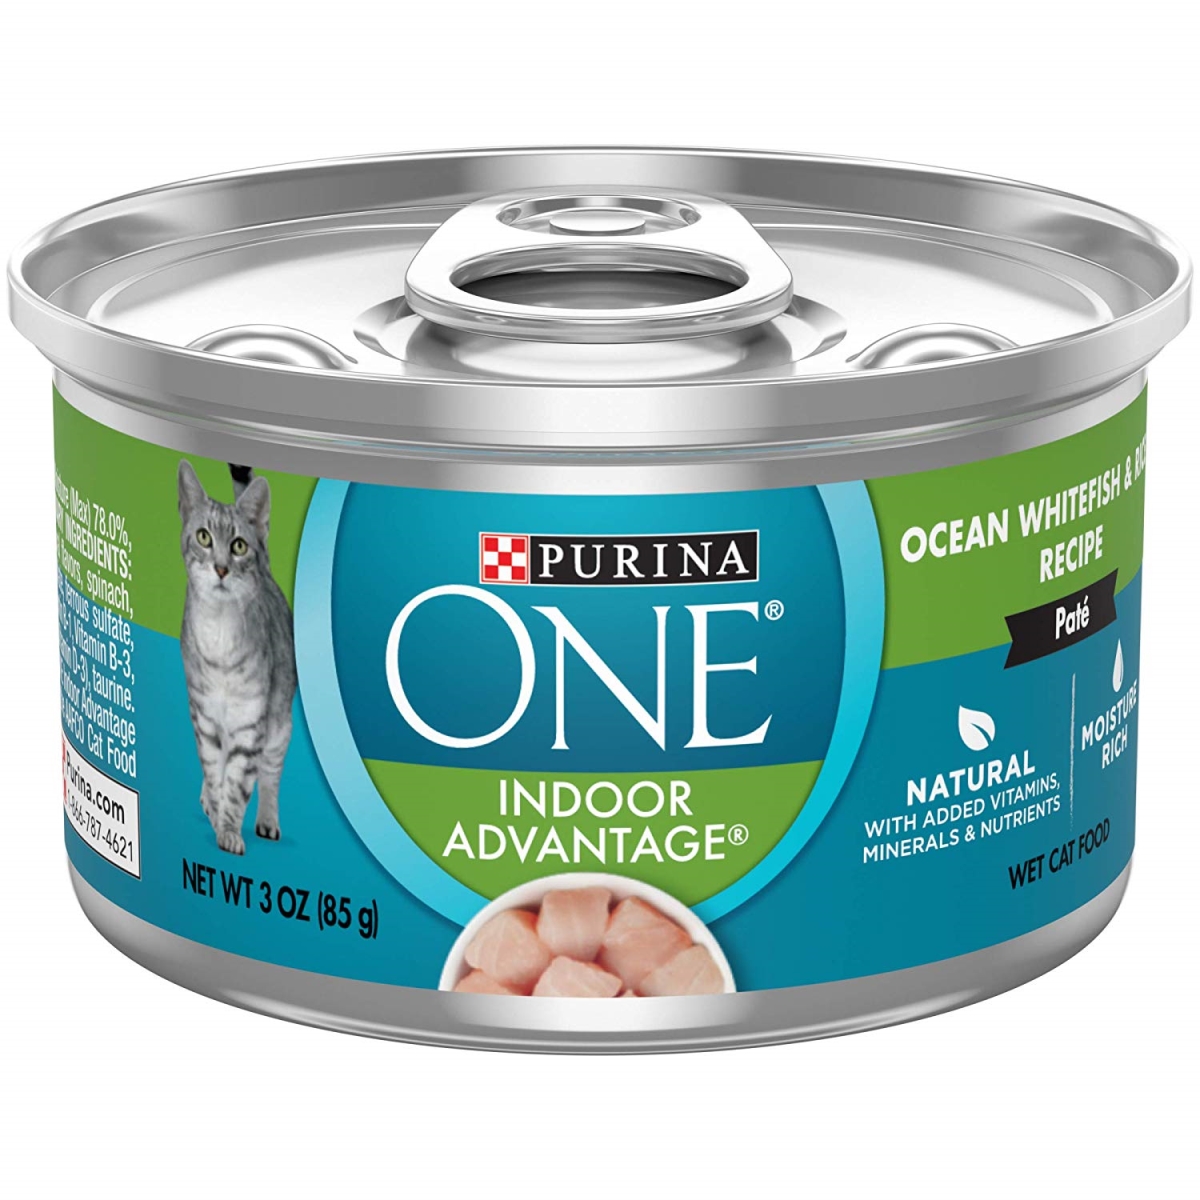 Purina 178892 3 Oz One Indoor Advantage Ocean Whitefish & Rice Recipe For Cat, Case Of 12